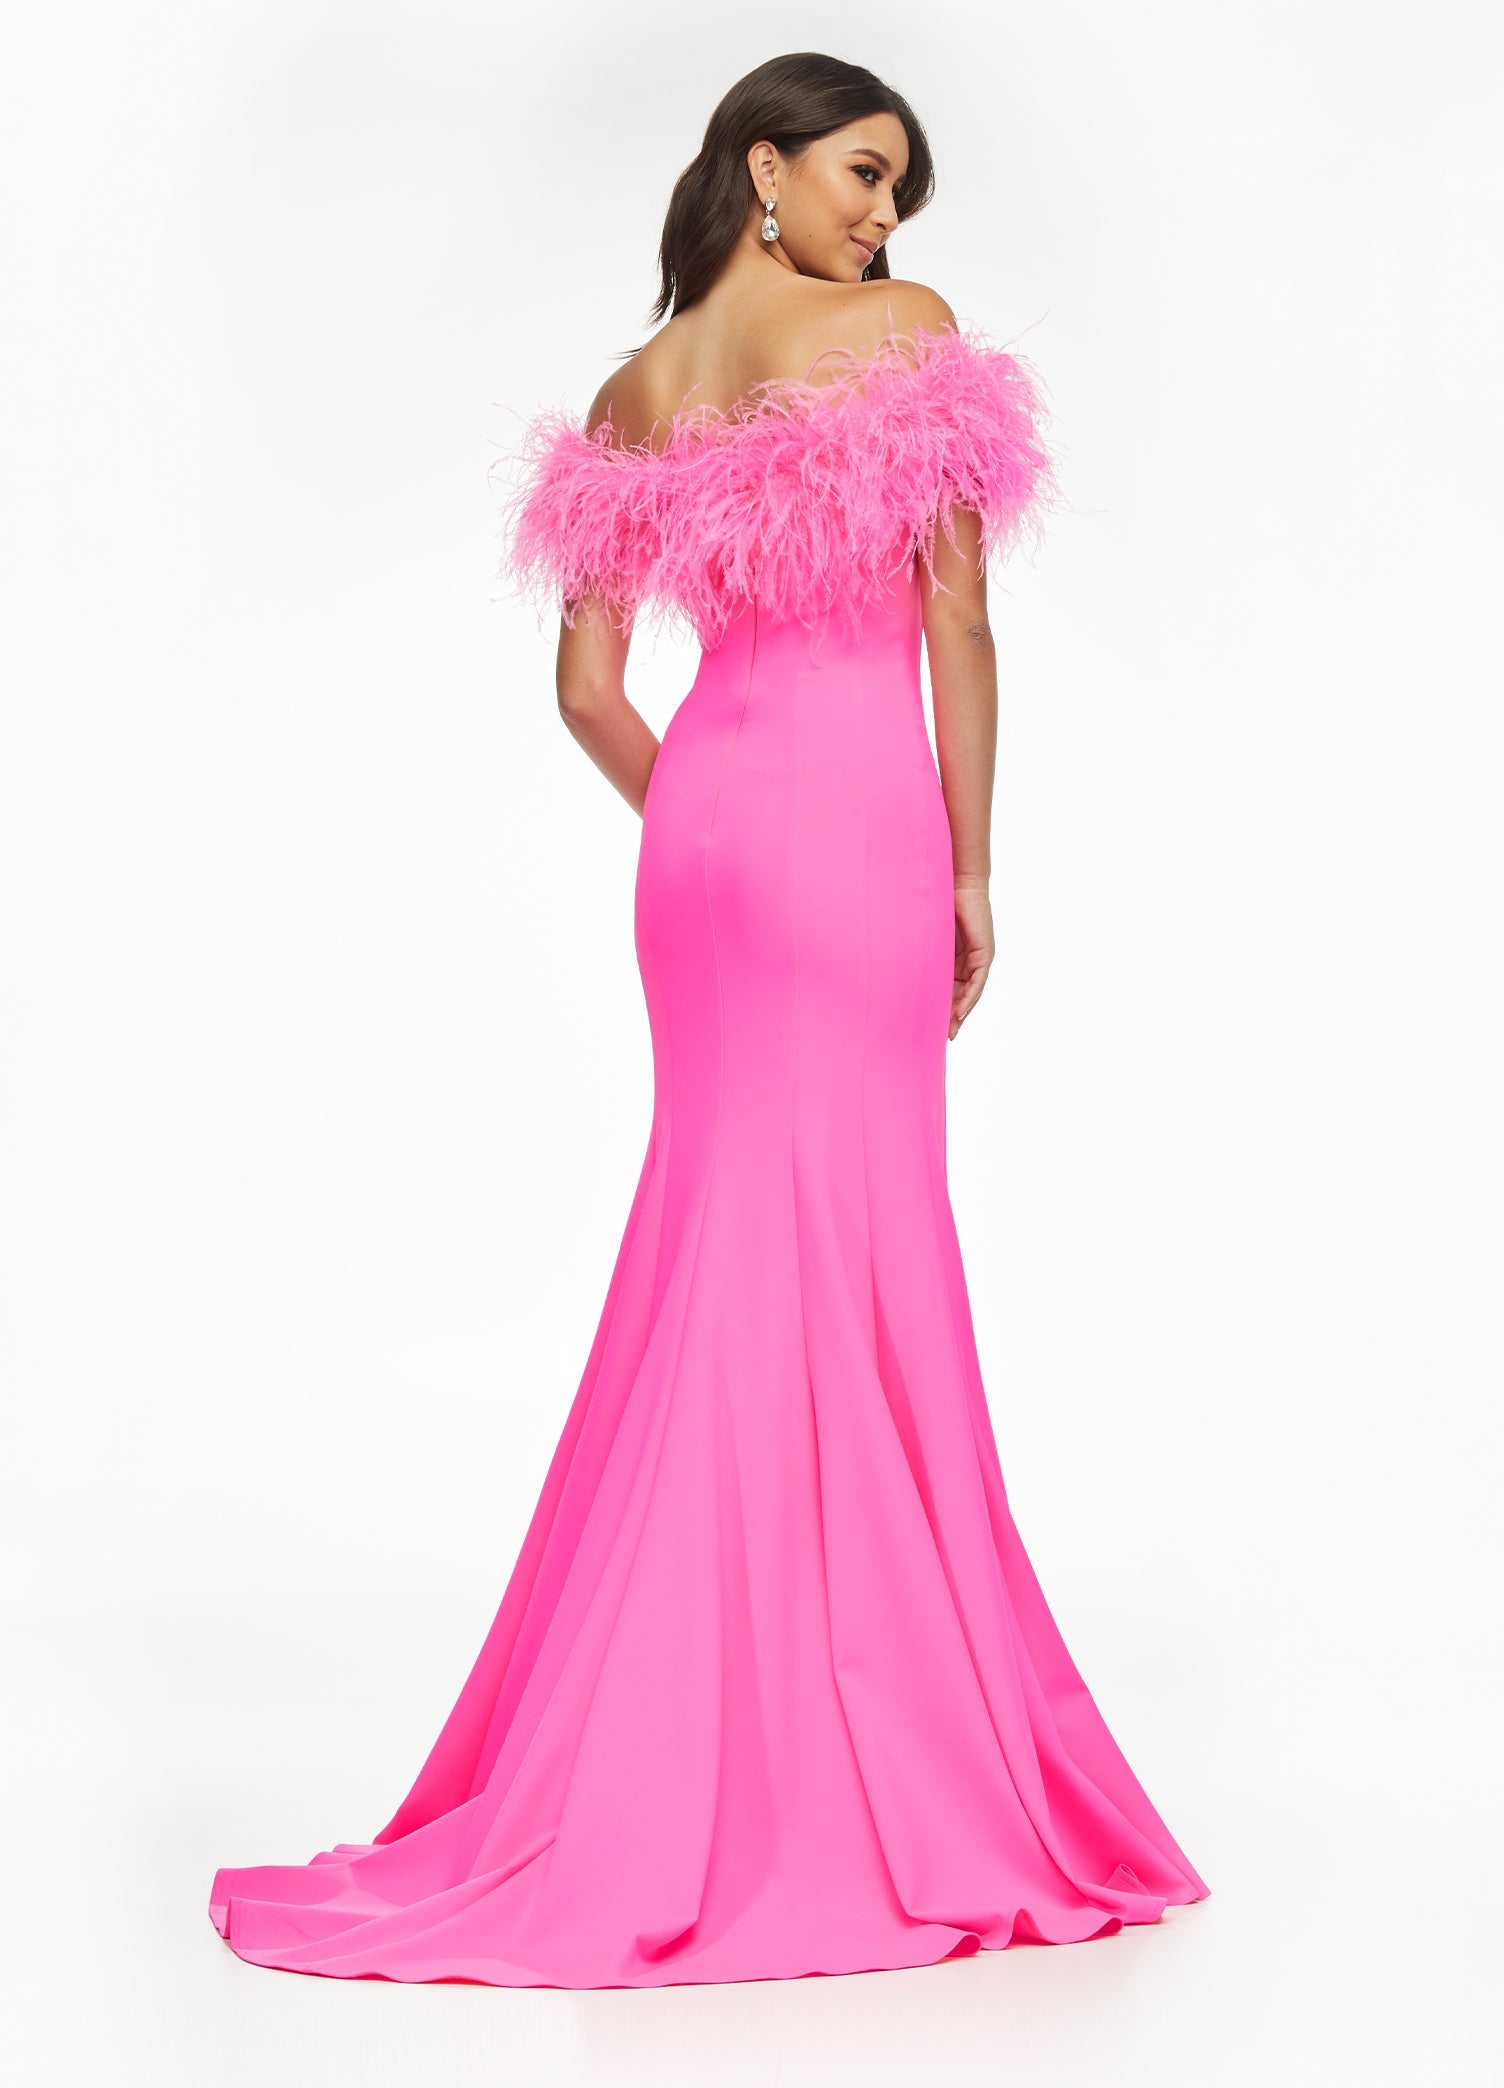 Ashley Lauren 11099 Feather Trimmed Prom Dress.  This elegant and fun prom dress is also excellent for pageants or other formal evening events.  It has an off the shoulder feather neckline that wraps all the way across your arms and to the back.  The long scuba skirt has a left leg slit and it has a train.  Colors:  Hot Pink, White, Turquoise, Hot Pink/Black  Sizes:   0, 2, 4, 6, 8, 10, 12, 14, 16